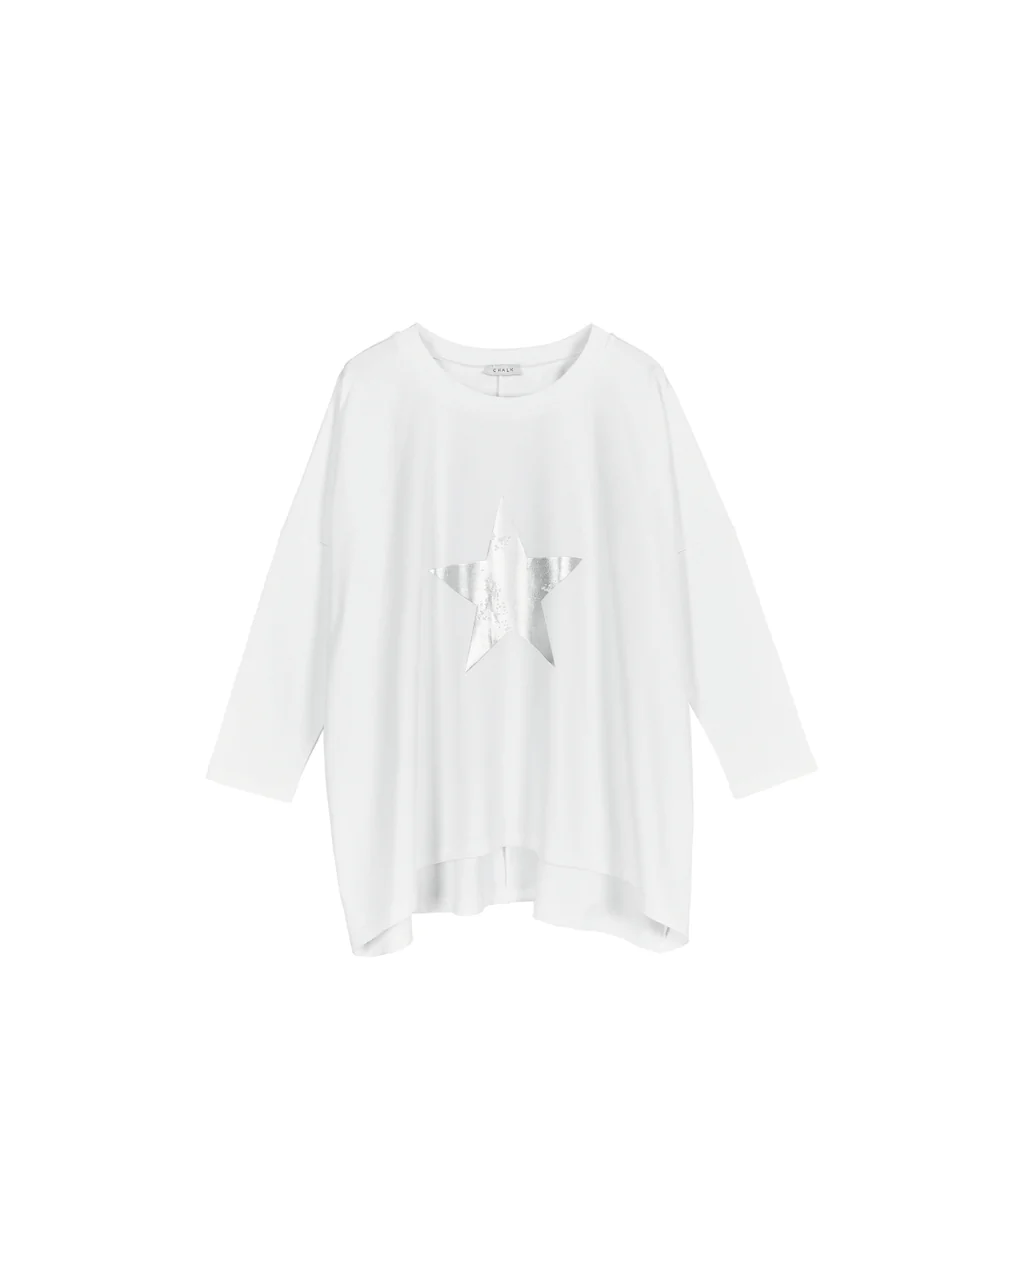 Chalk - Olivia Top in White with Star